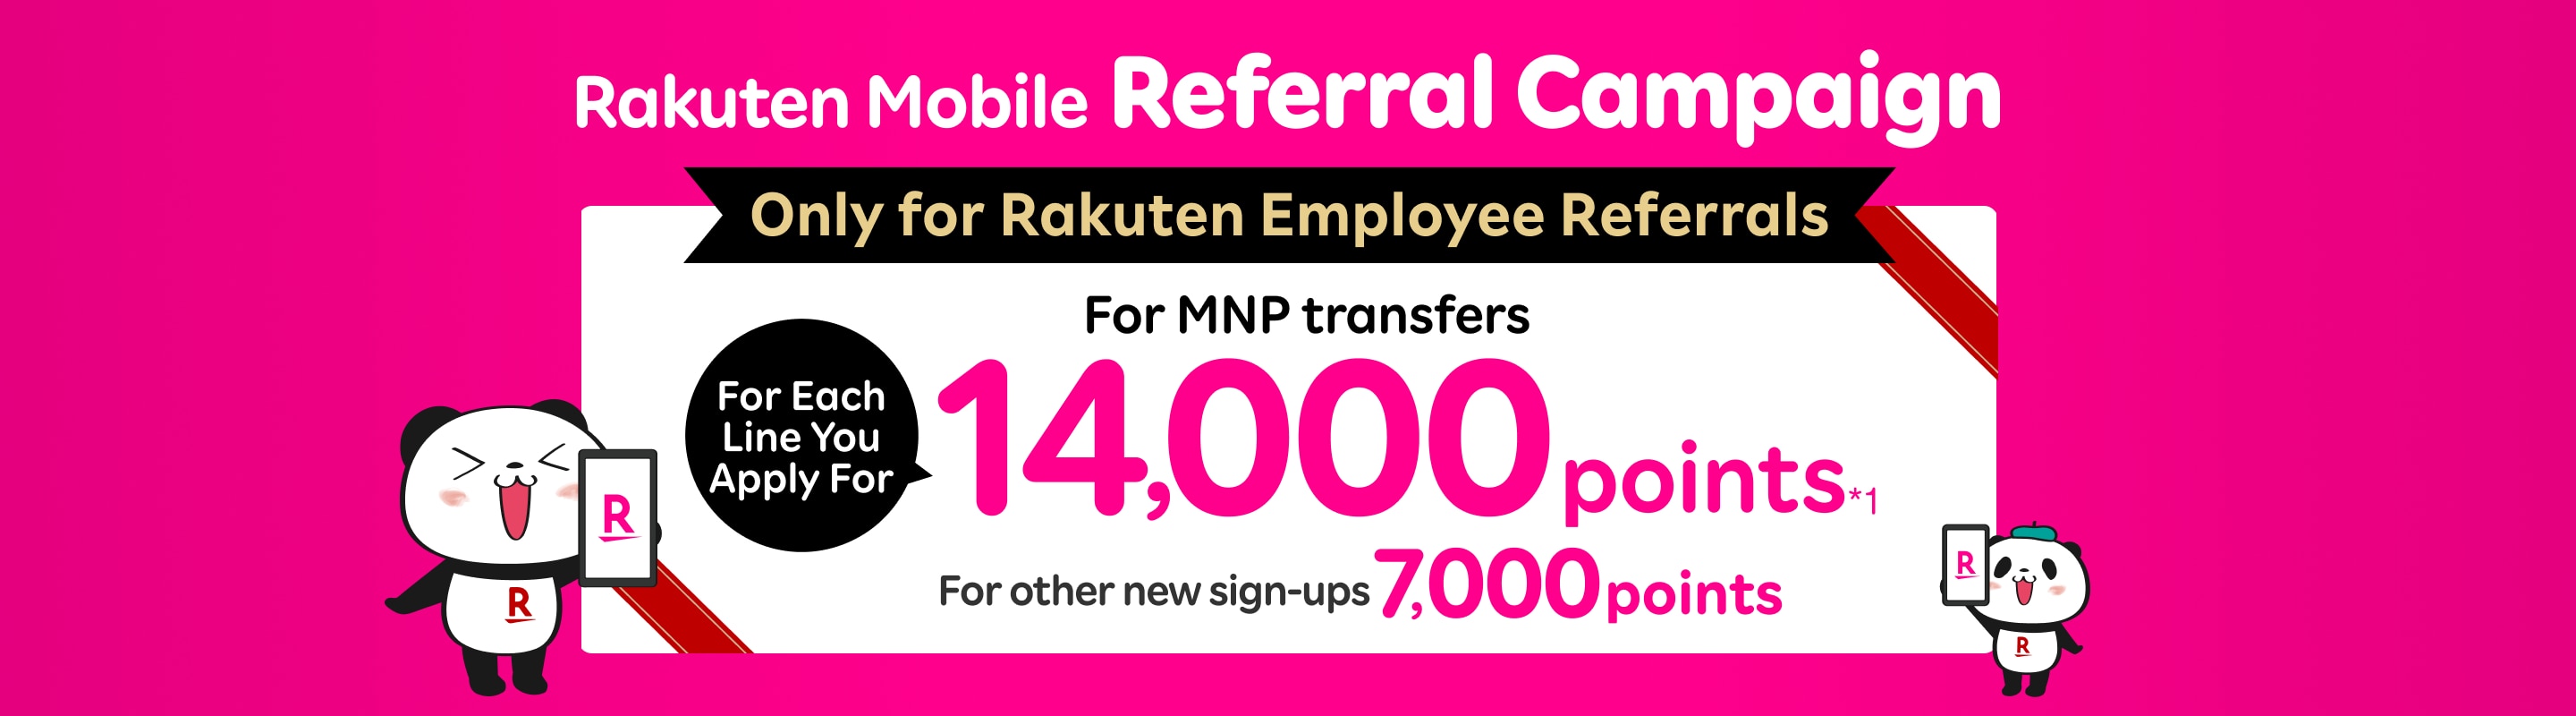 Rakuten SAIKYO Plan Referral Campaign for special customers! For each line application when referred by a Rakuten employee, you’ll receive 14,000 points for MNP transfers, or 7,000 points for other new sign-ups.